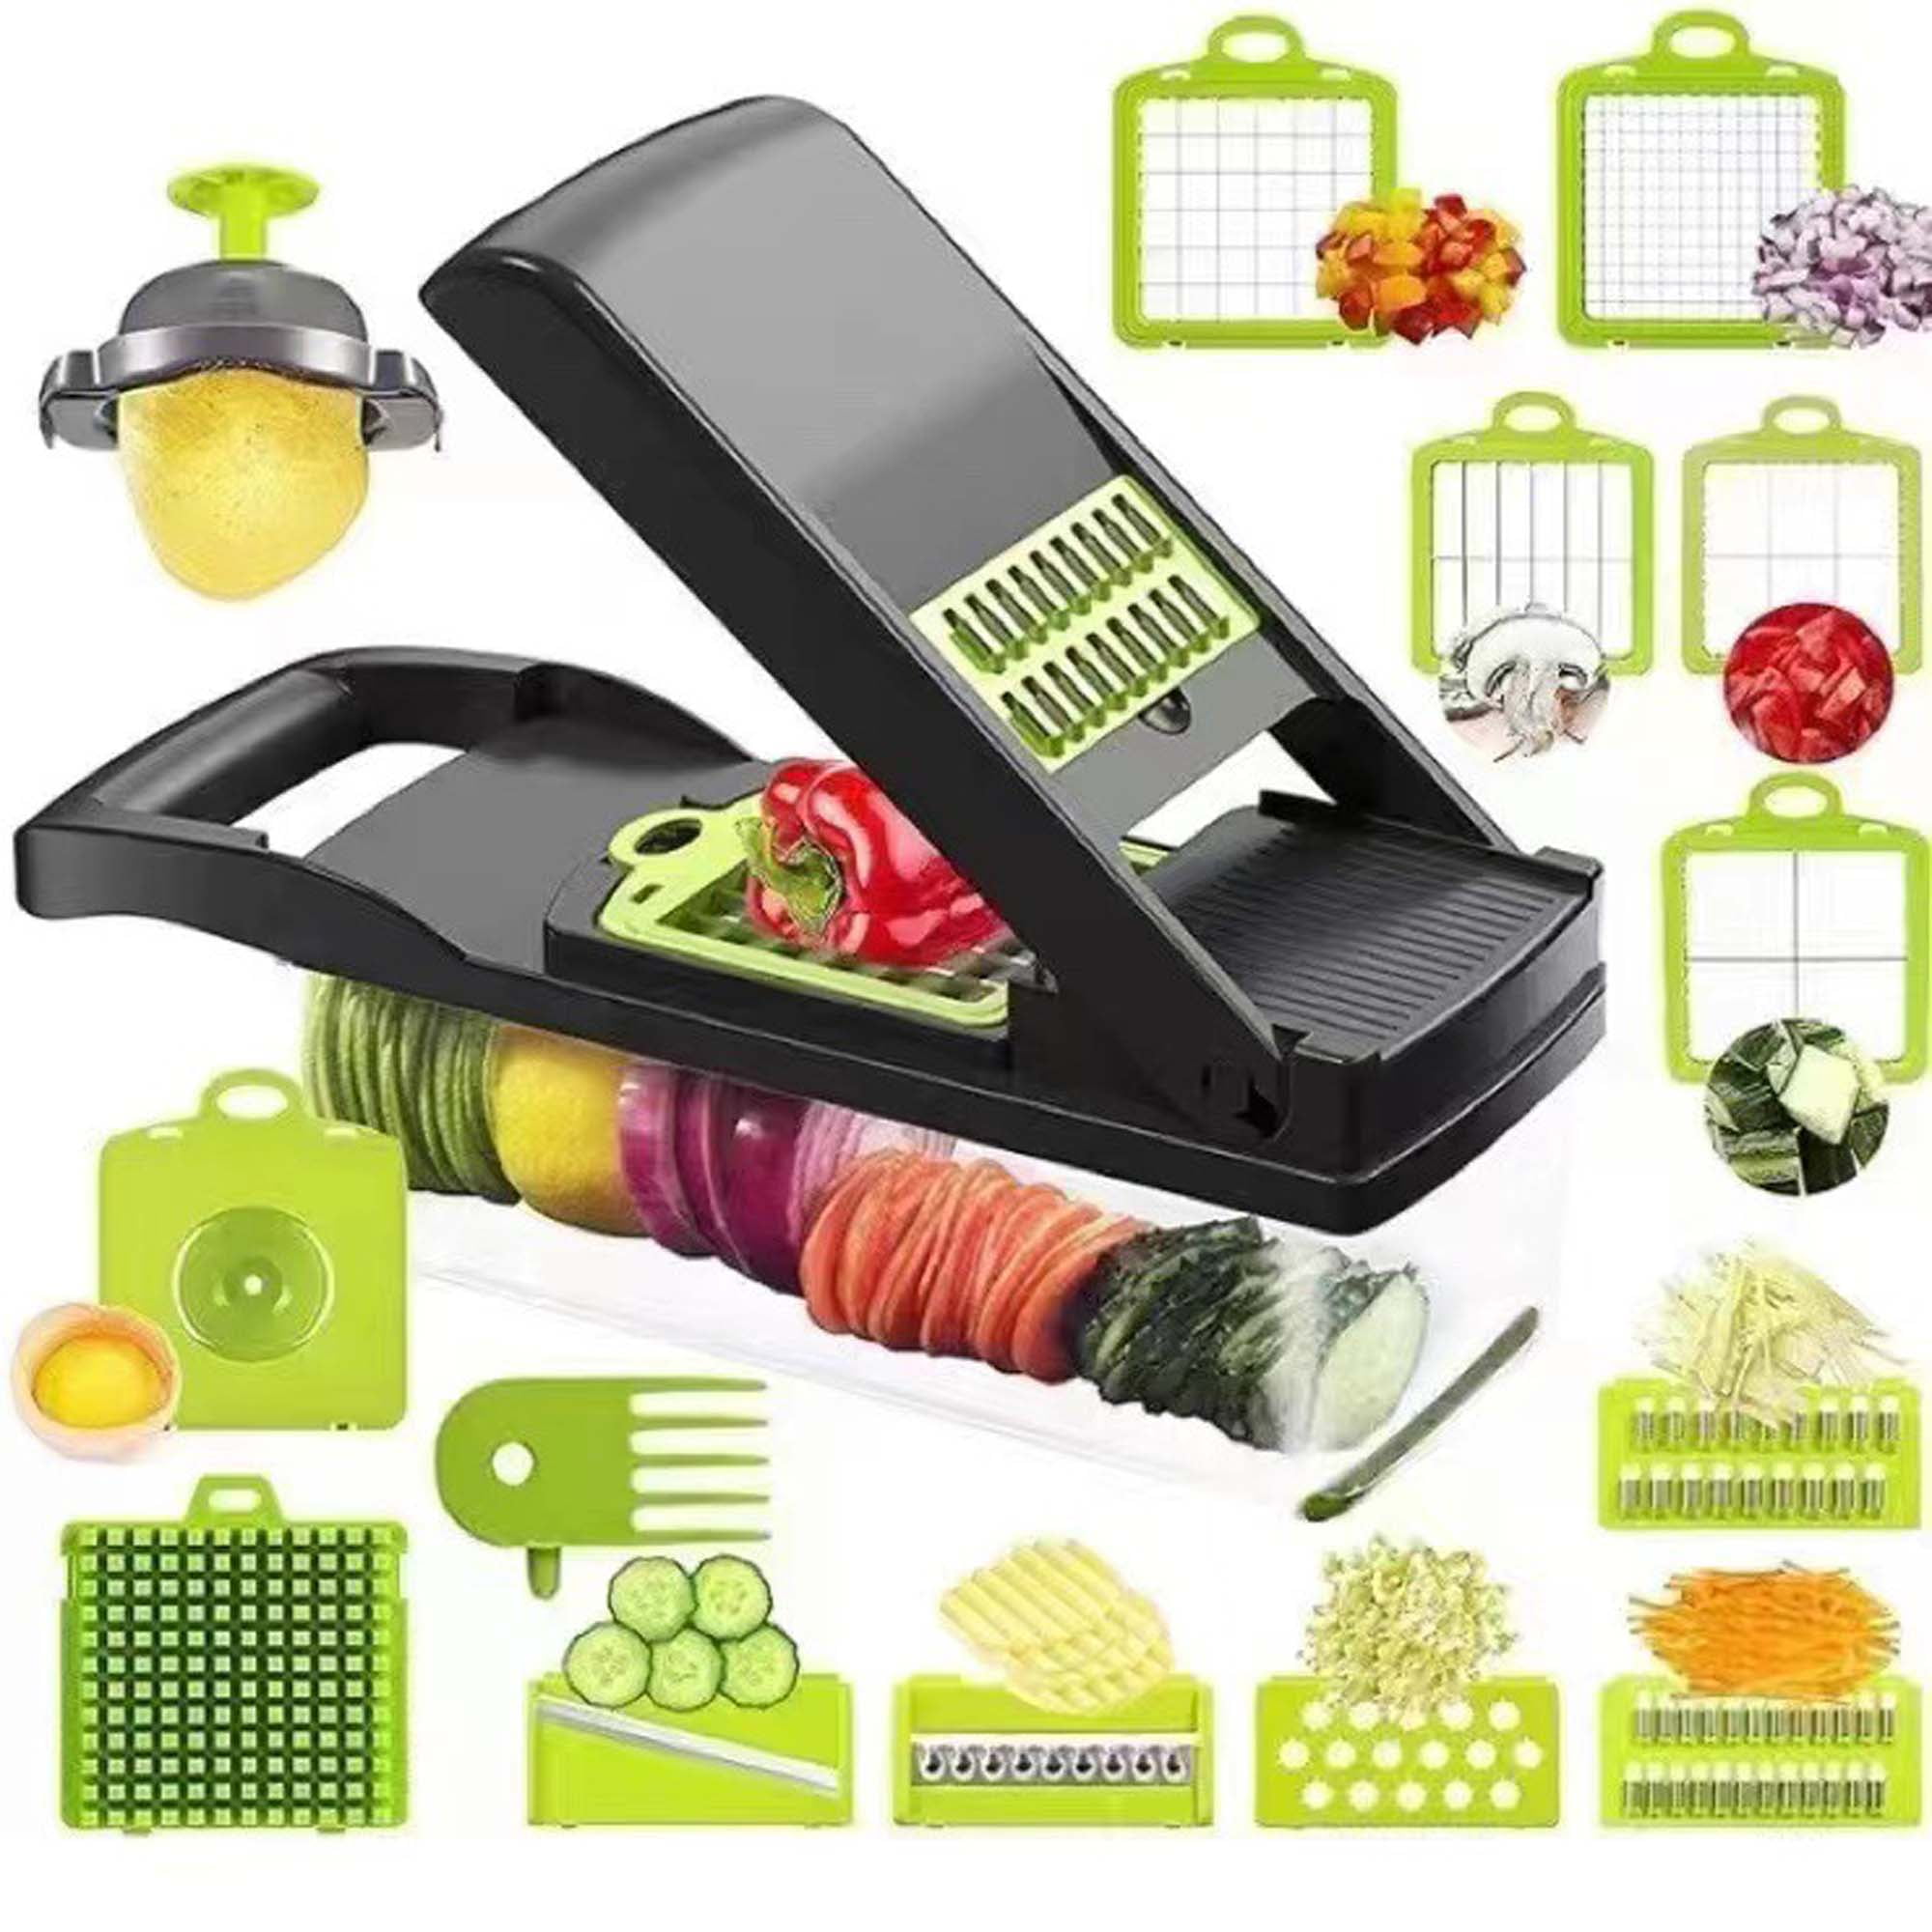 13 Packs Vegetable Chopper Set, Pro Onion Chopper, Multifunctional 13 in 1  Food Chopper, Kitchen Vegetable Slicer Dicer Cutter,Veggie Chopper With 8  Blades,Carrot and Garlic Chopper With Container 